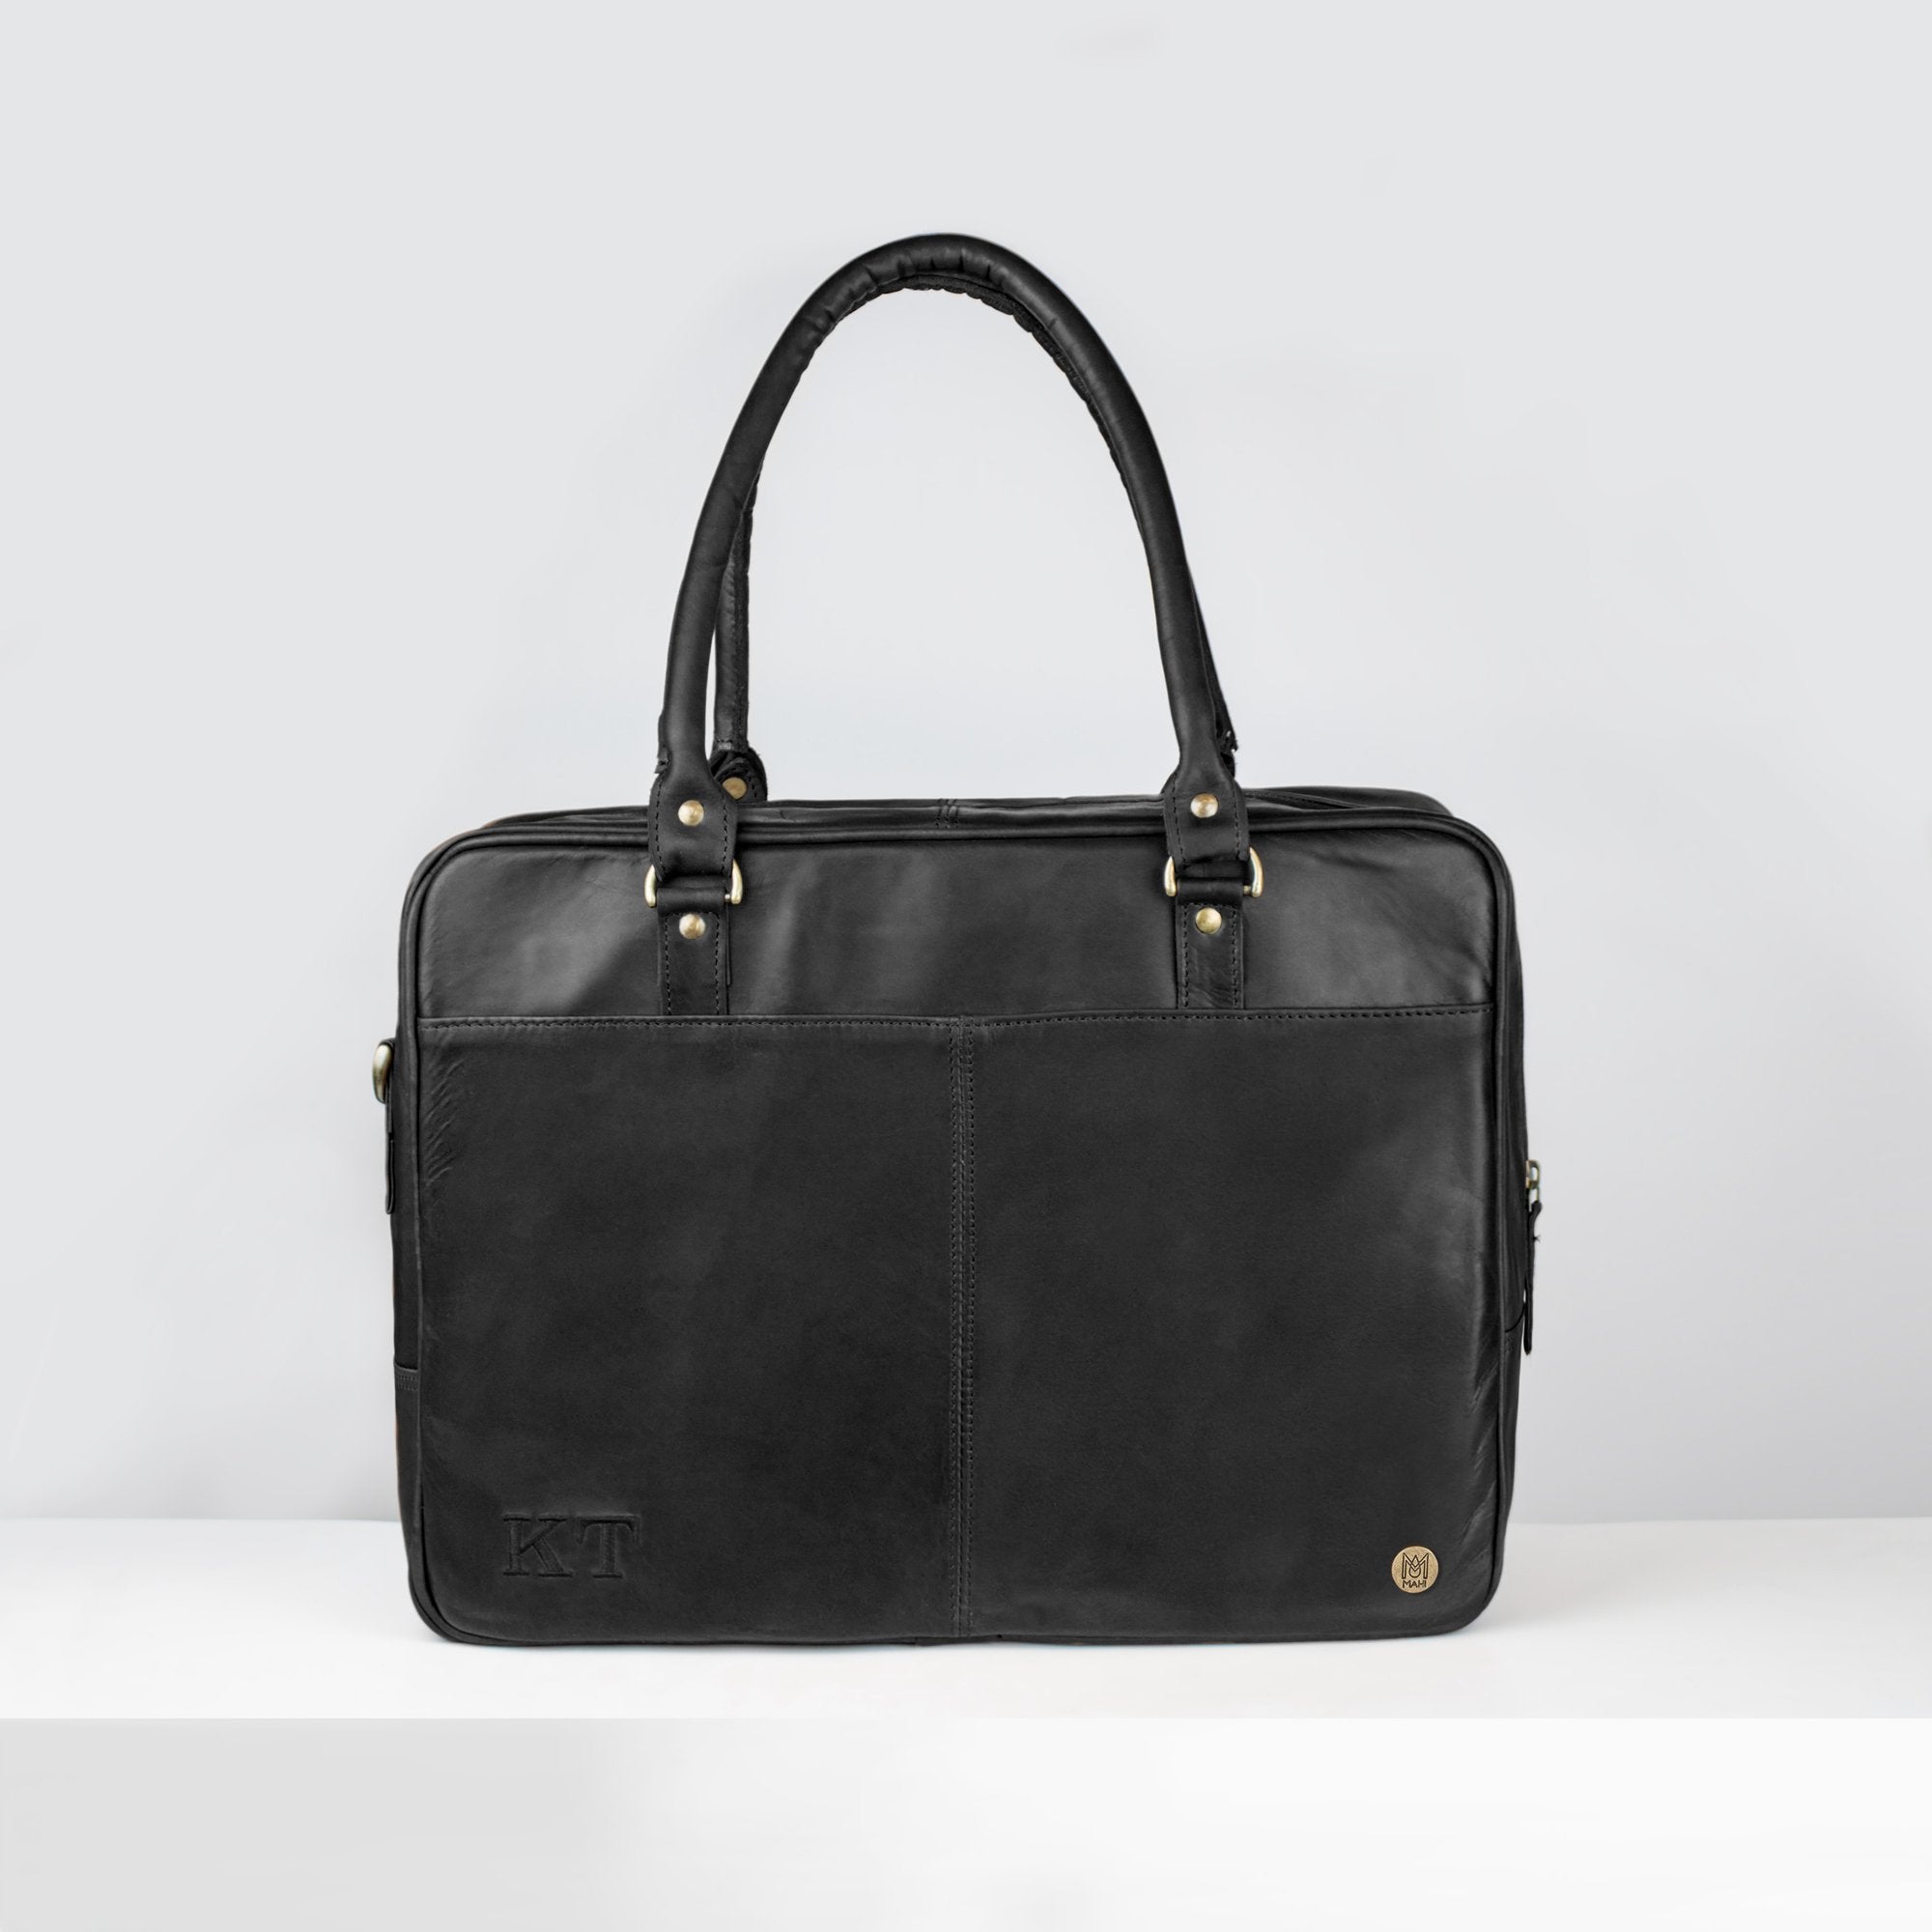 Black Leather Laptop Bag For Work with 15